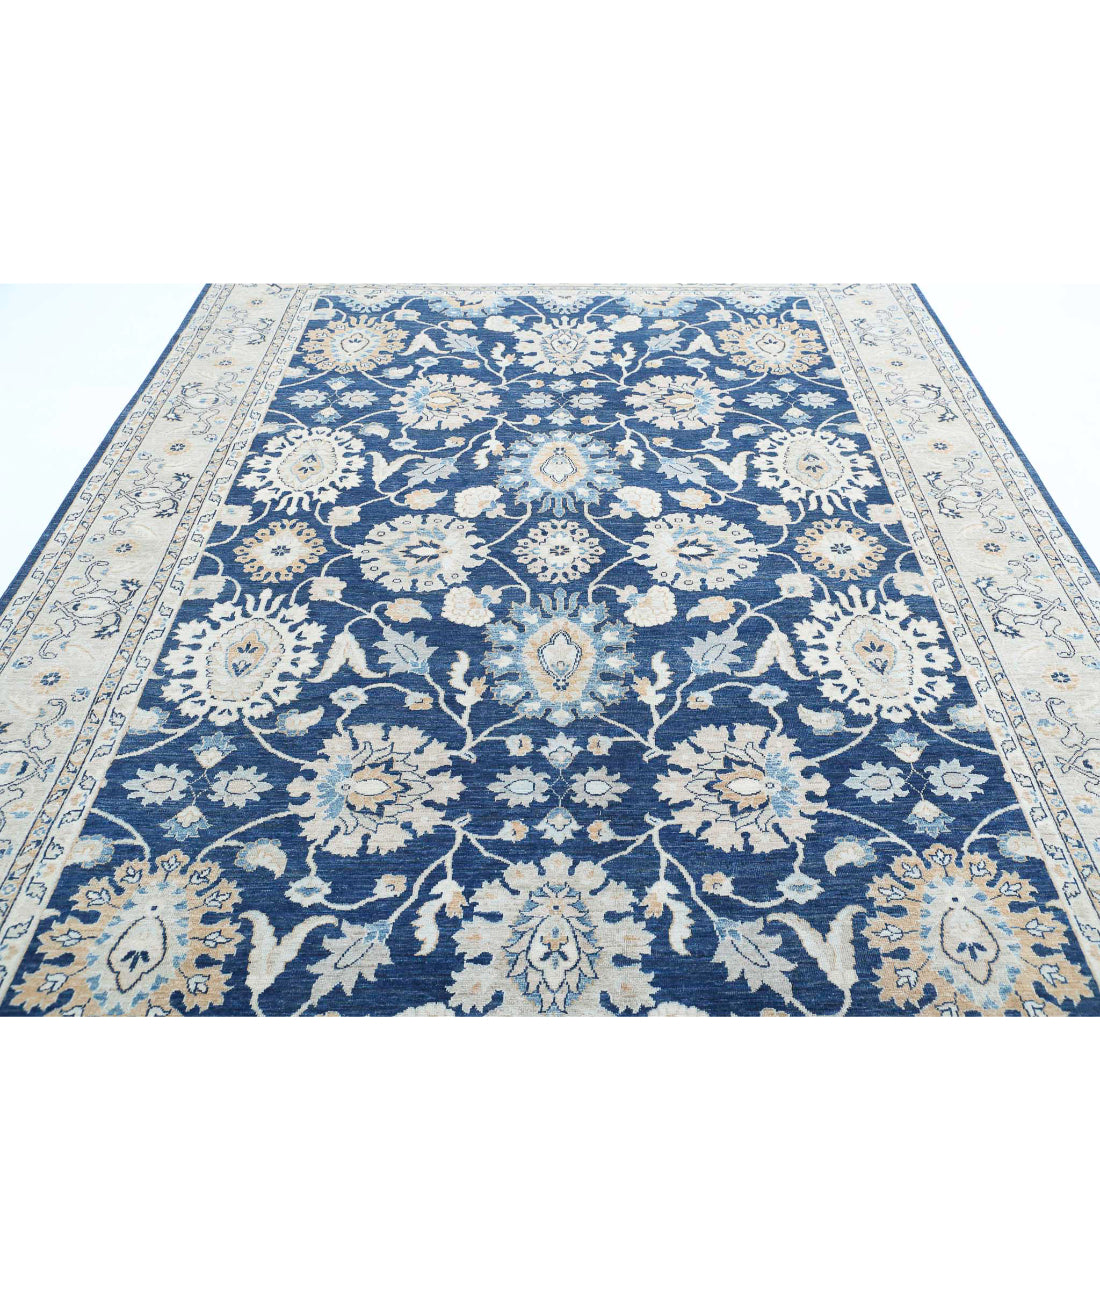 Ziegler 8'3'' X 11'1'' Hand-Knotted Wool Rug 8'3'' x 11'1'' (248 X 333) / Blue / Ivory